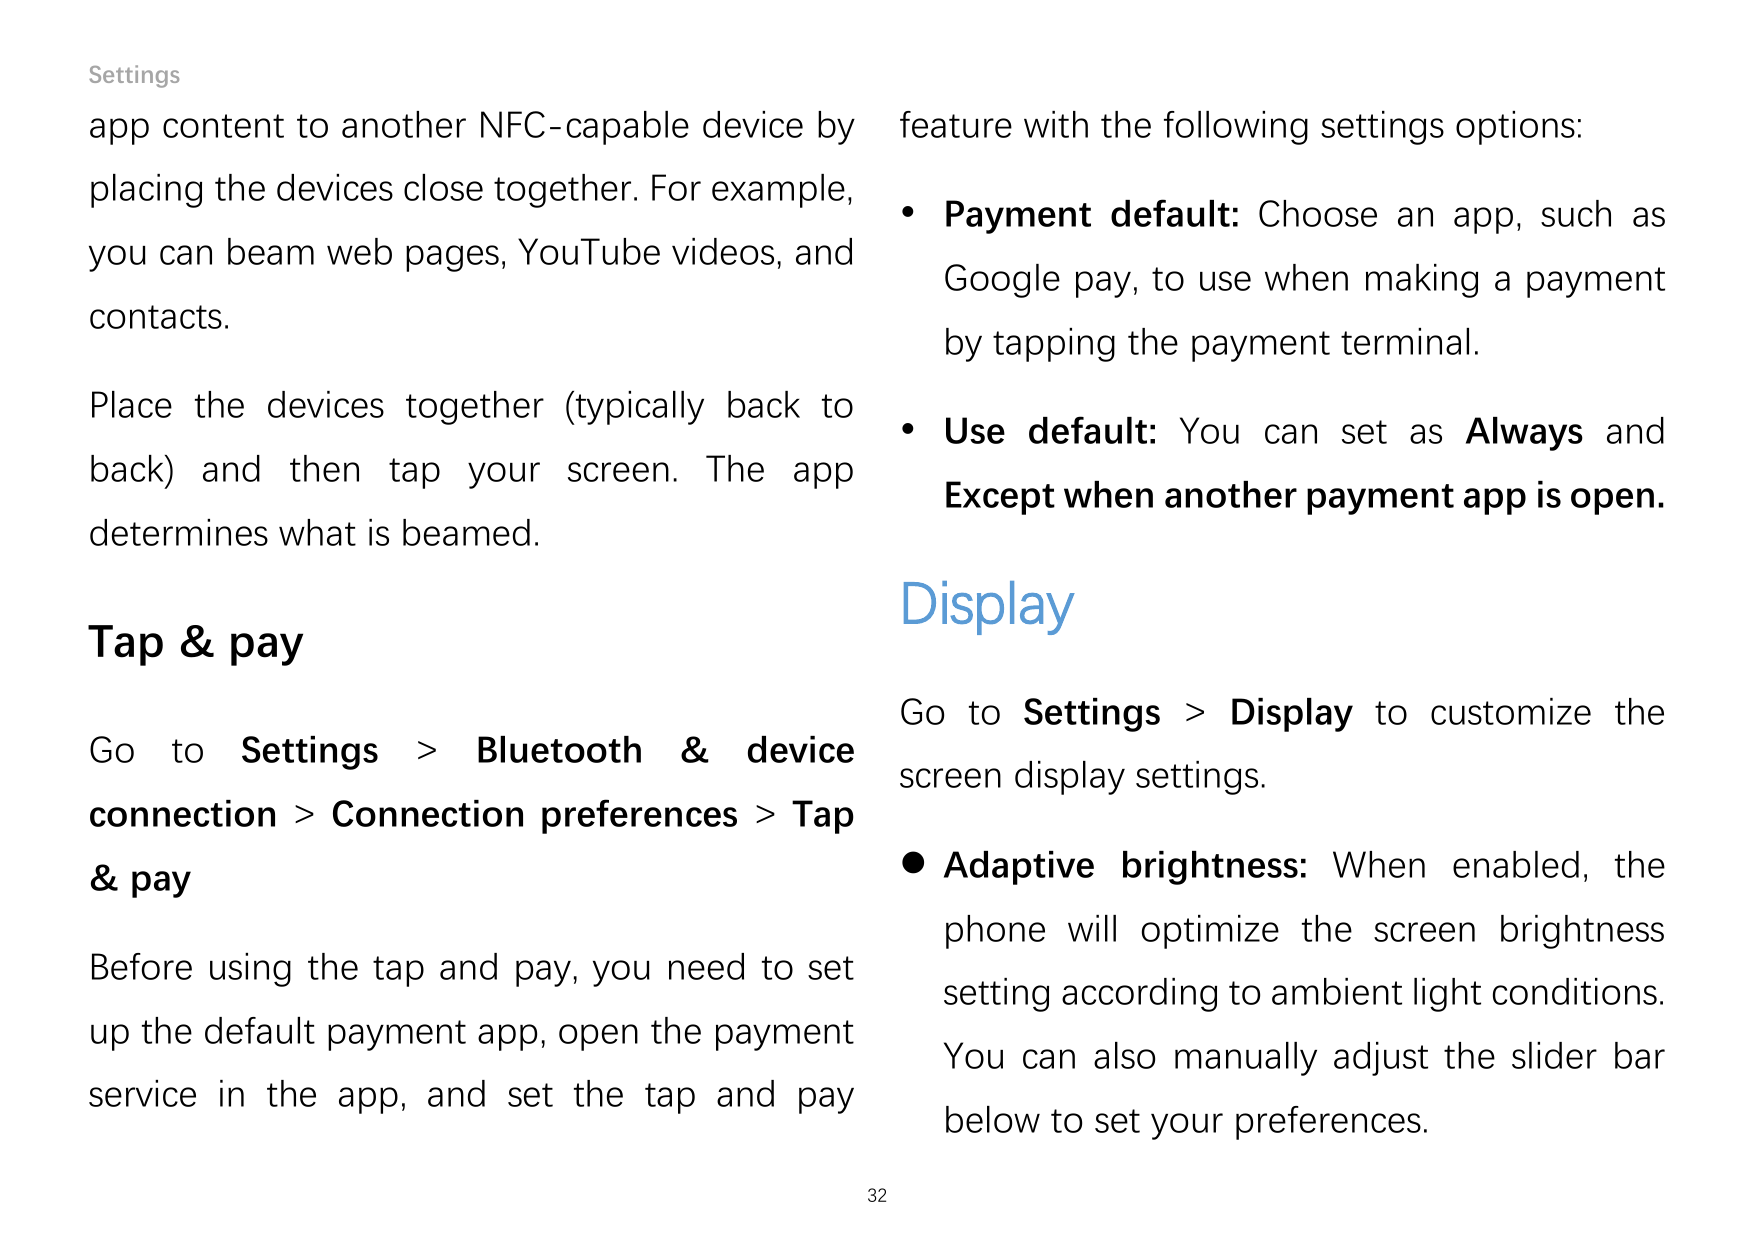 Settingsapp content to another NFC-capable device byfeature with the following settings options:placing the devices close togeth